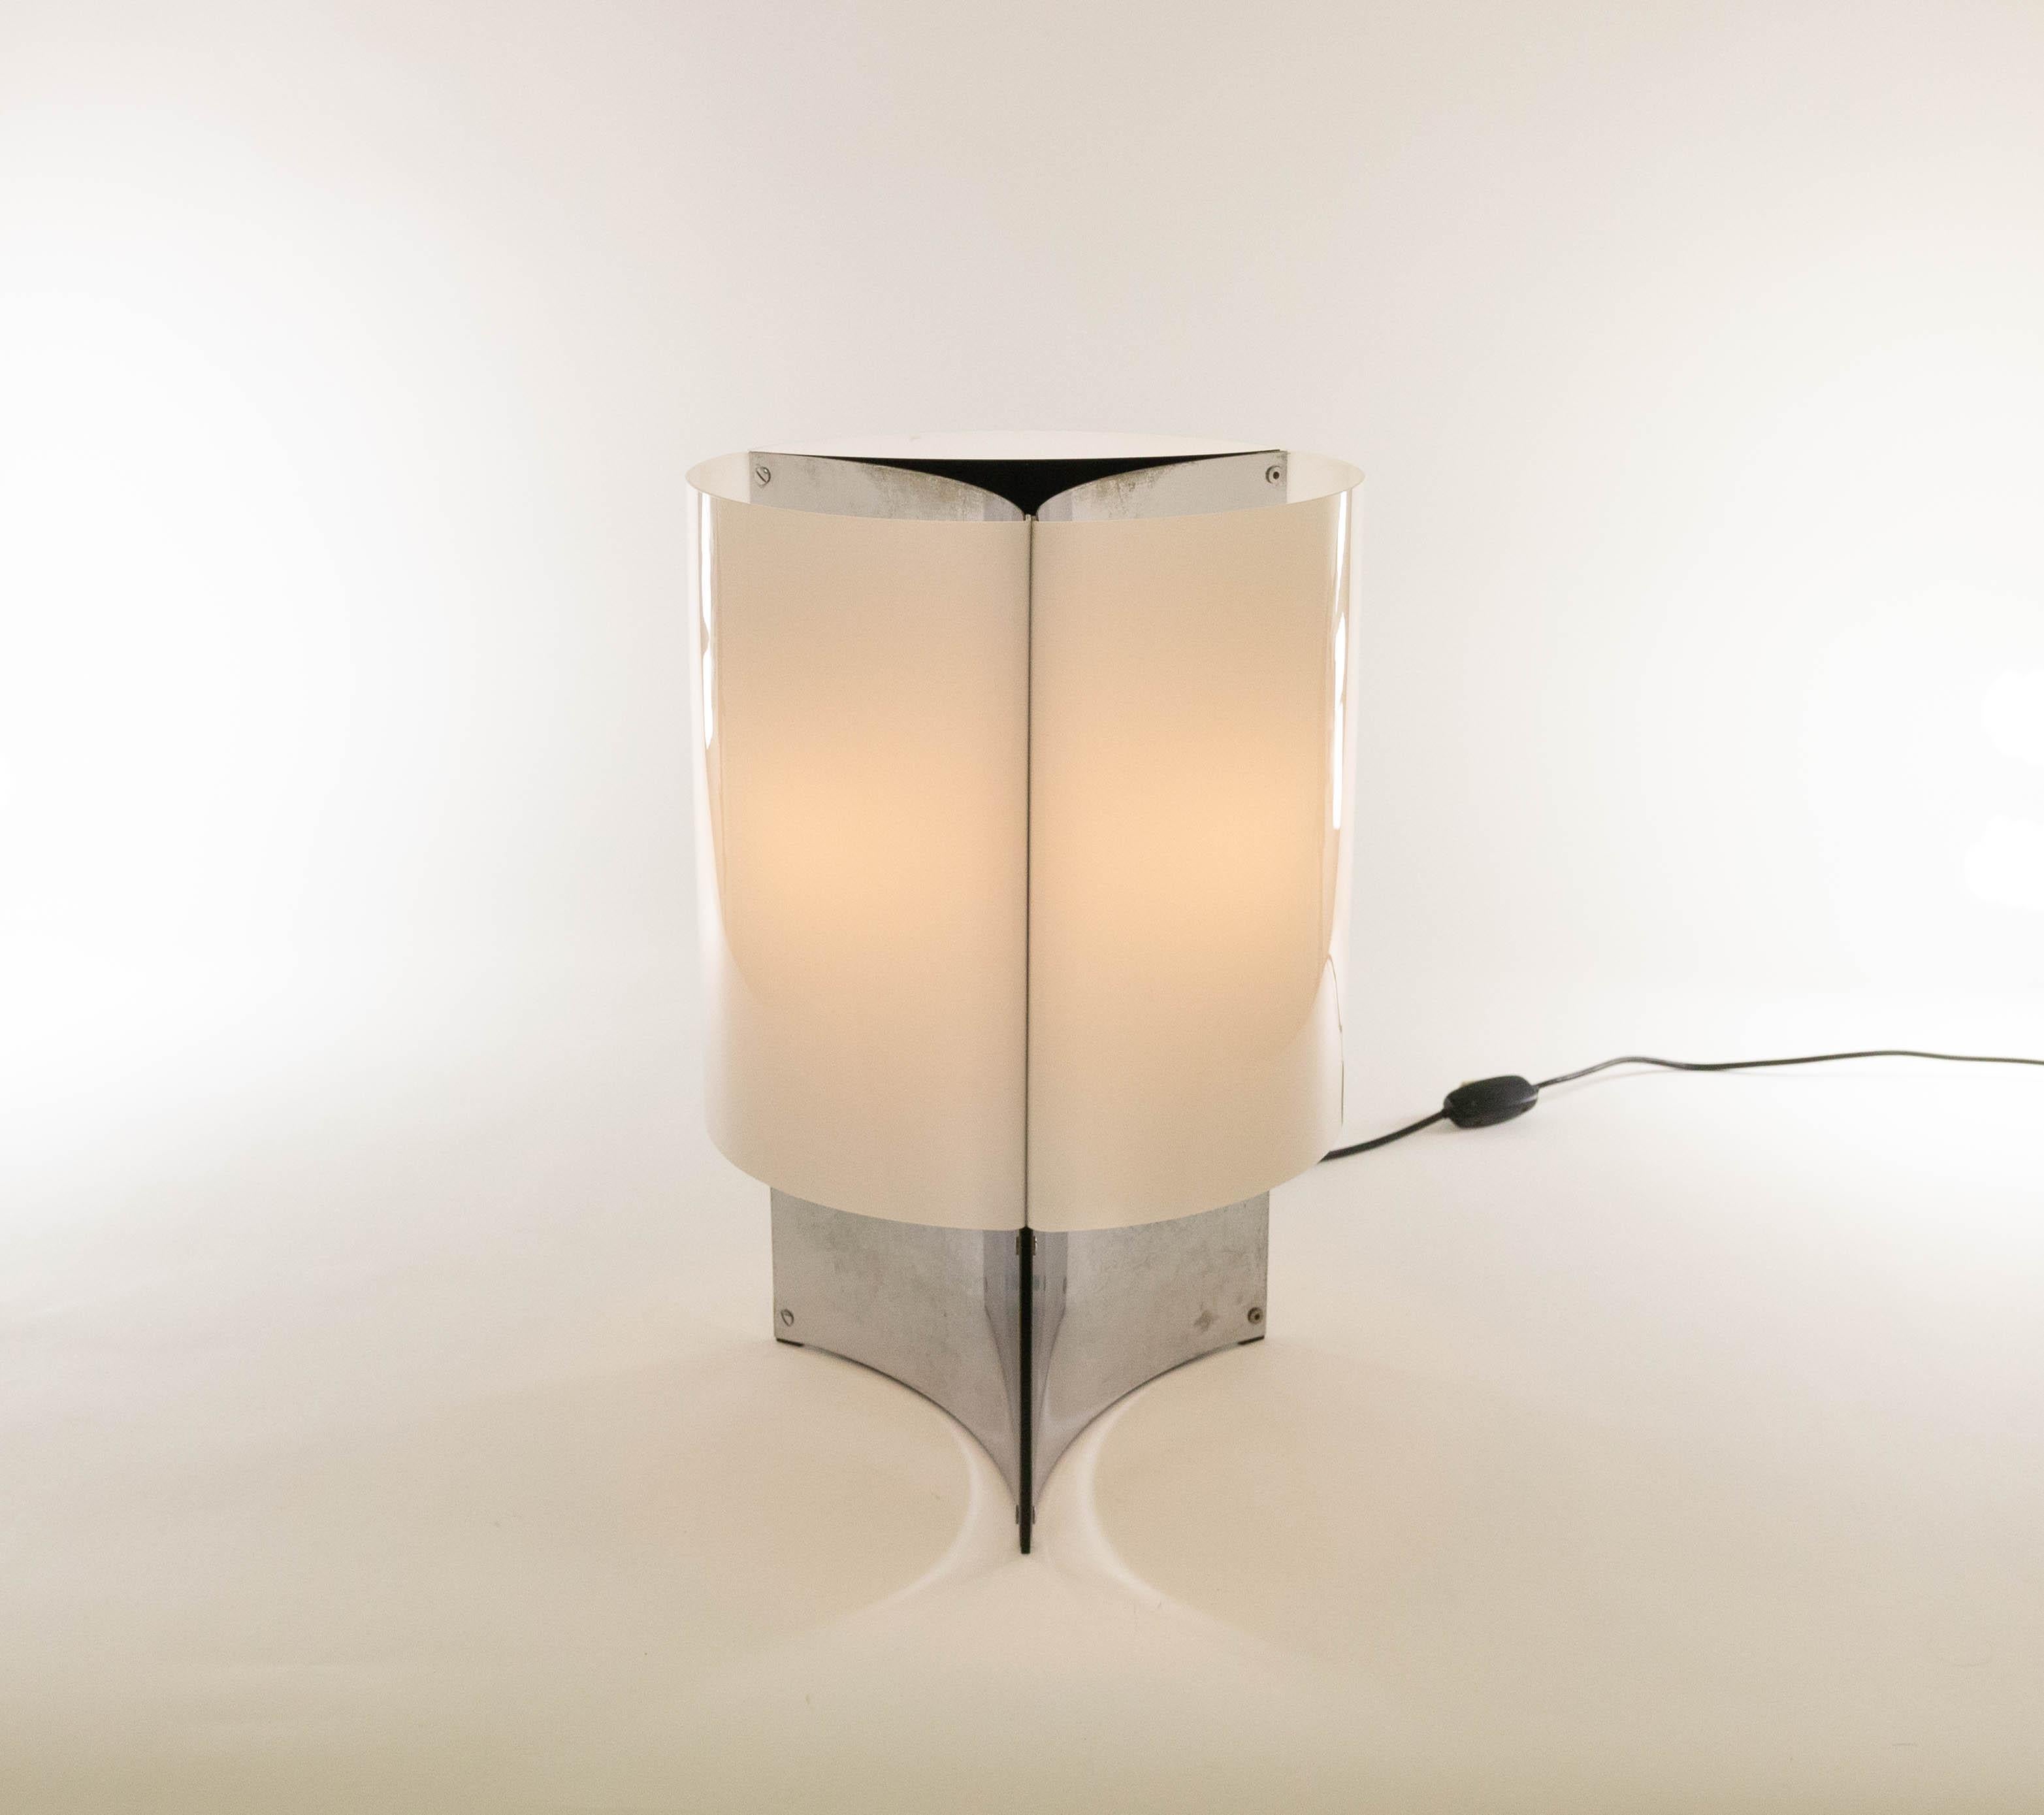 This elegant lamp model 526 was designed in 1965 by Massimo Vignelli for Italian lighting manufacturer Arteluce.

Model 526 is a table lamp with a base that consists of three concave chromed sheets. This base is covered by white Perspex shades. It